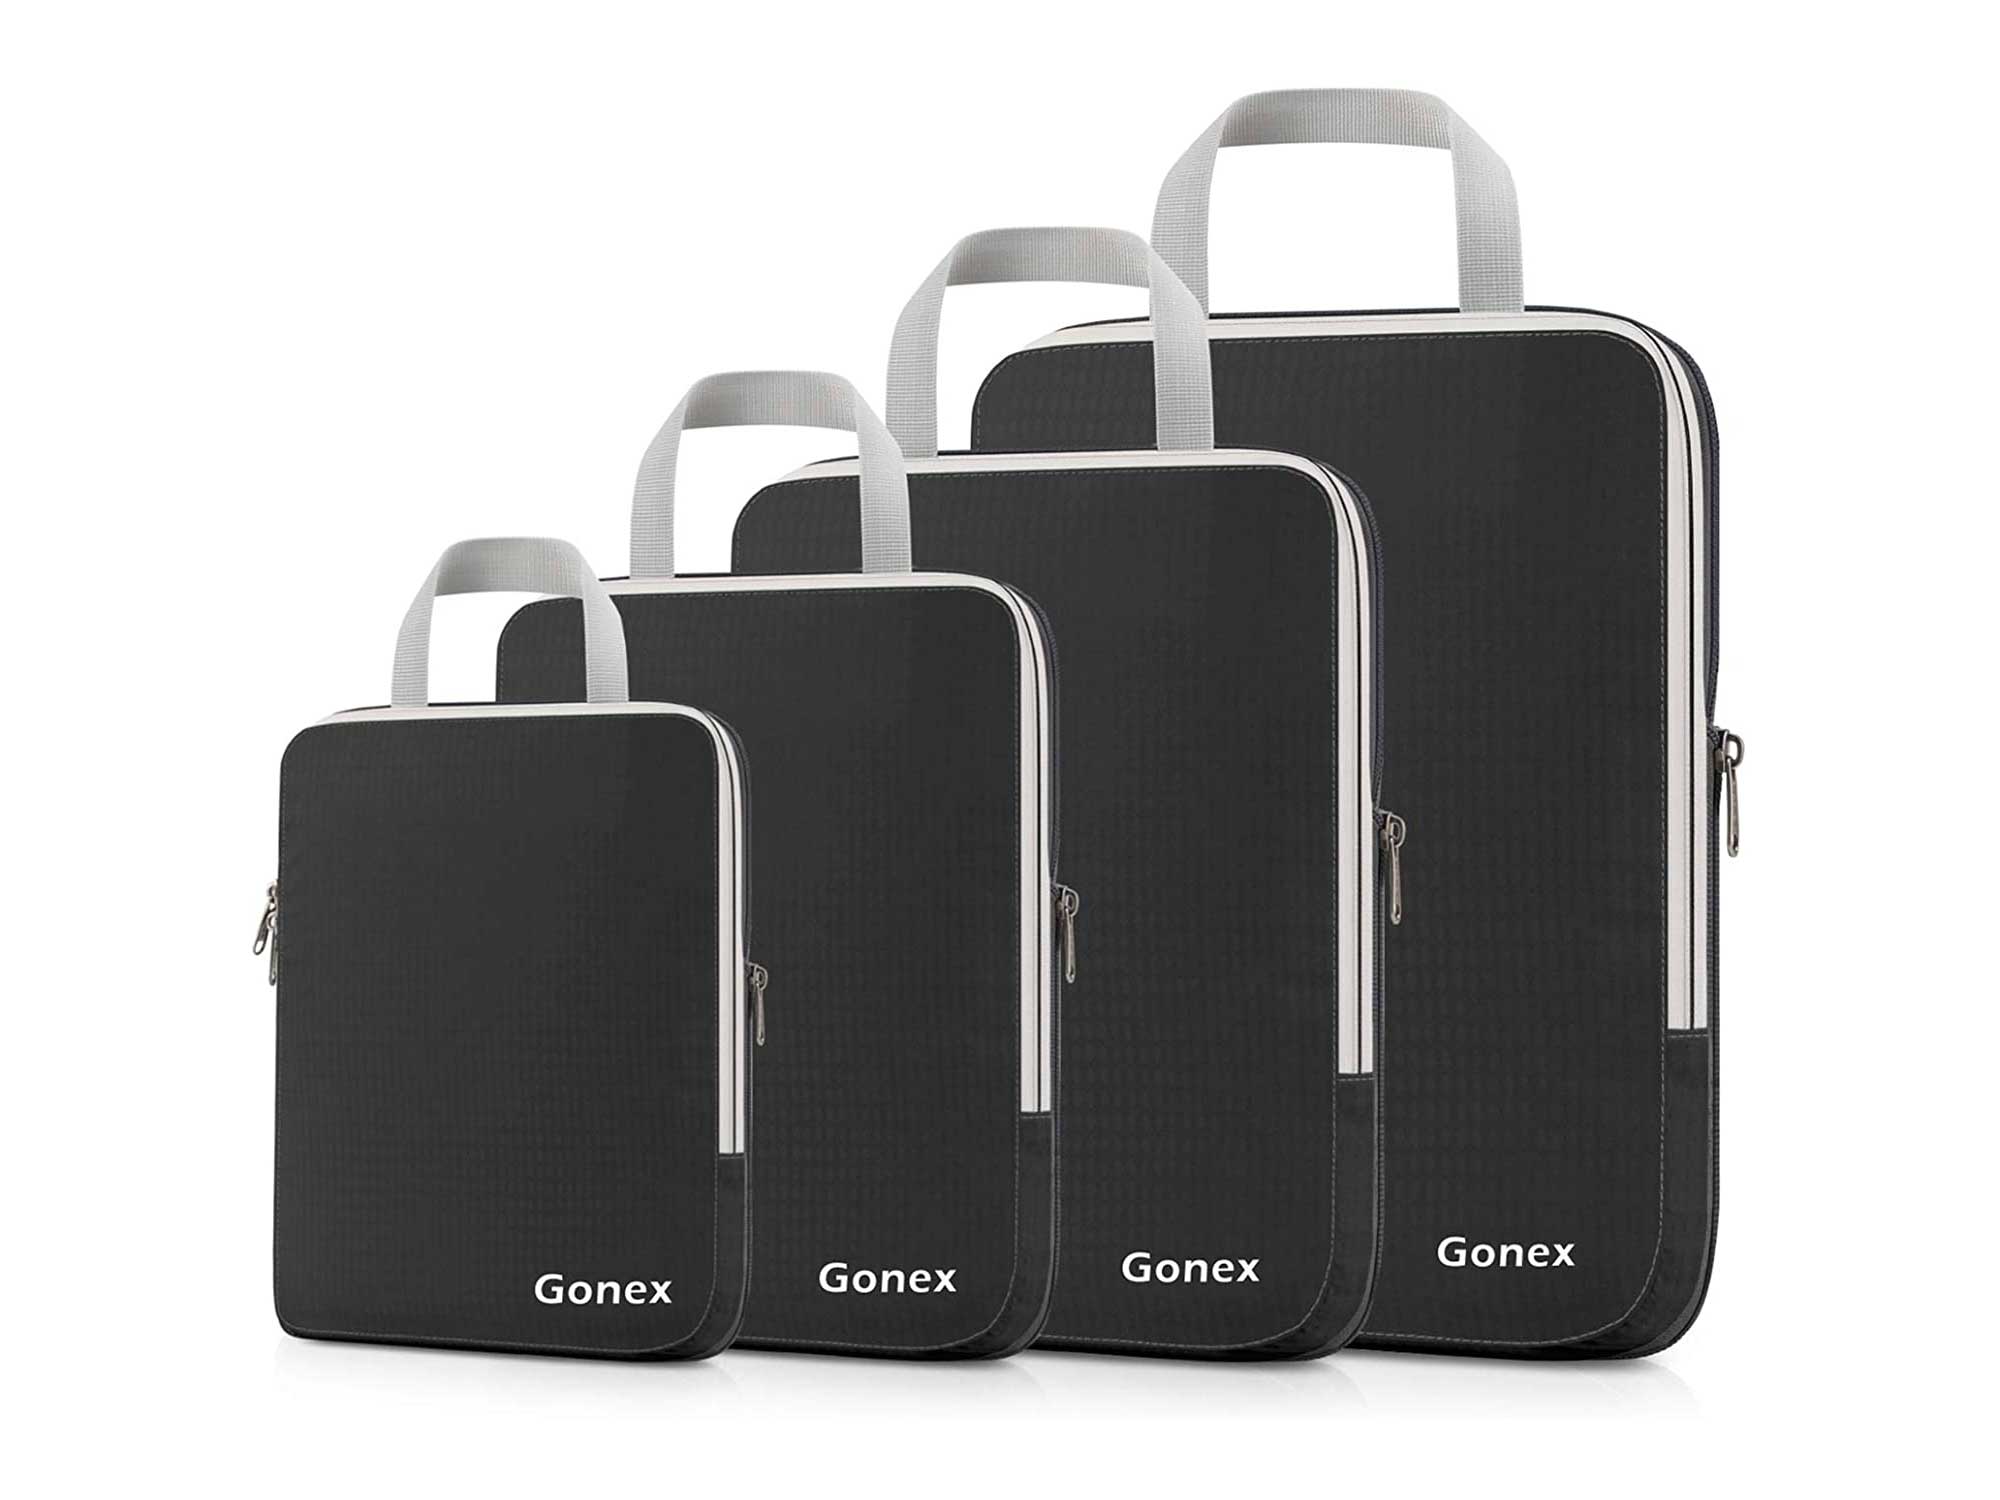 Gonex Compression Packing Cubes, 4pcs Expandable Storage Travel Luggage Bags Organizers